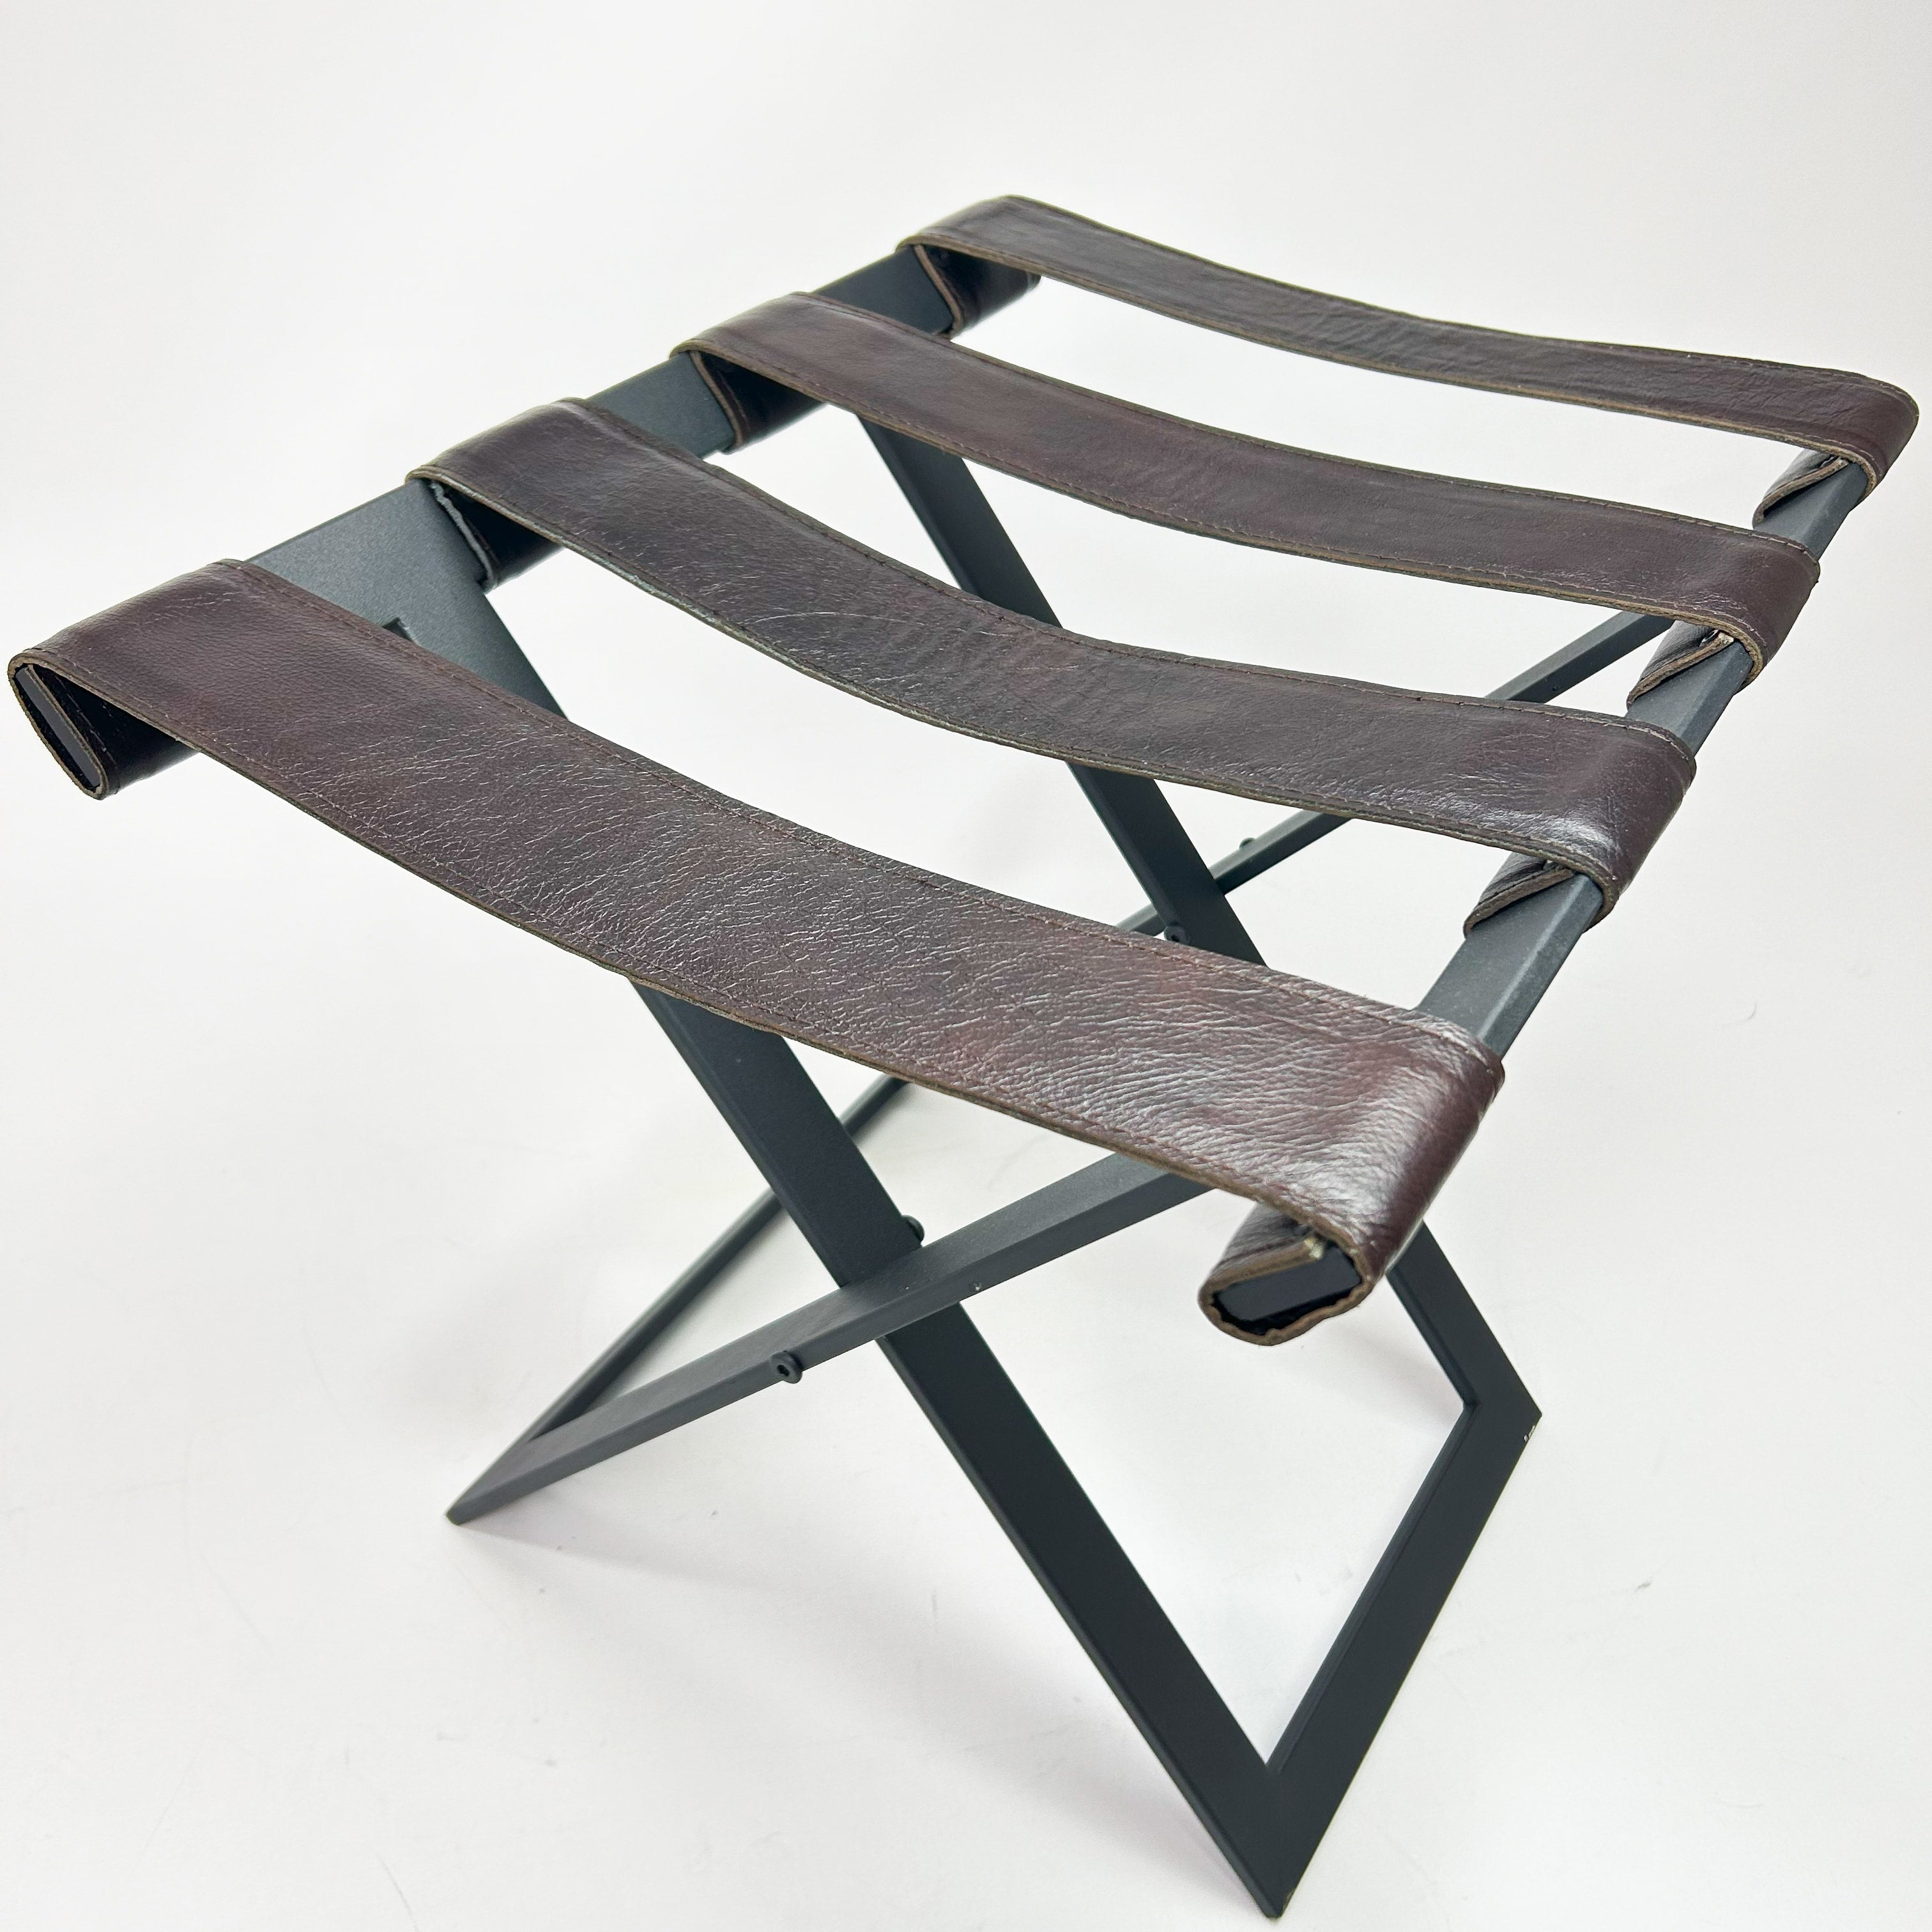 Foldable Metal Luggage Rack with Genuie Leather